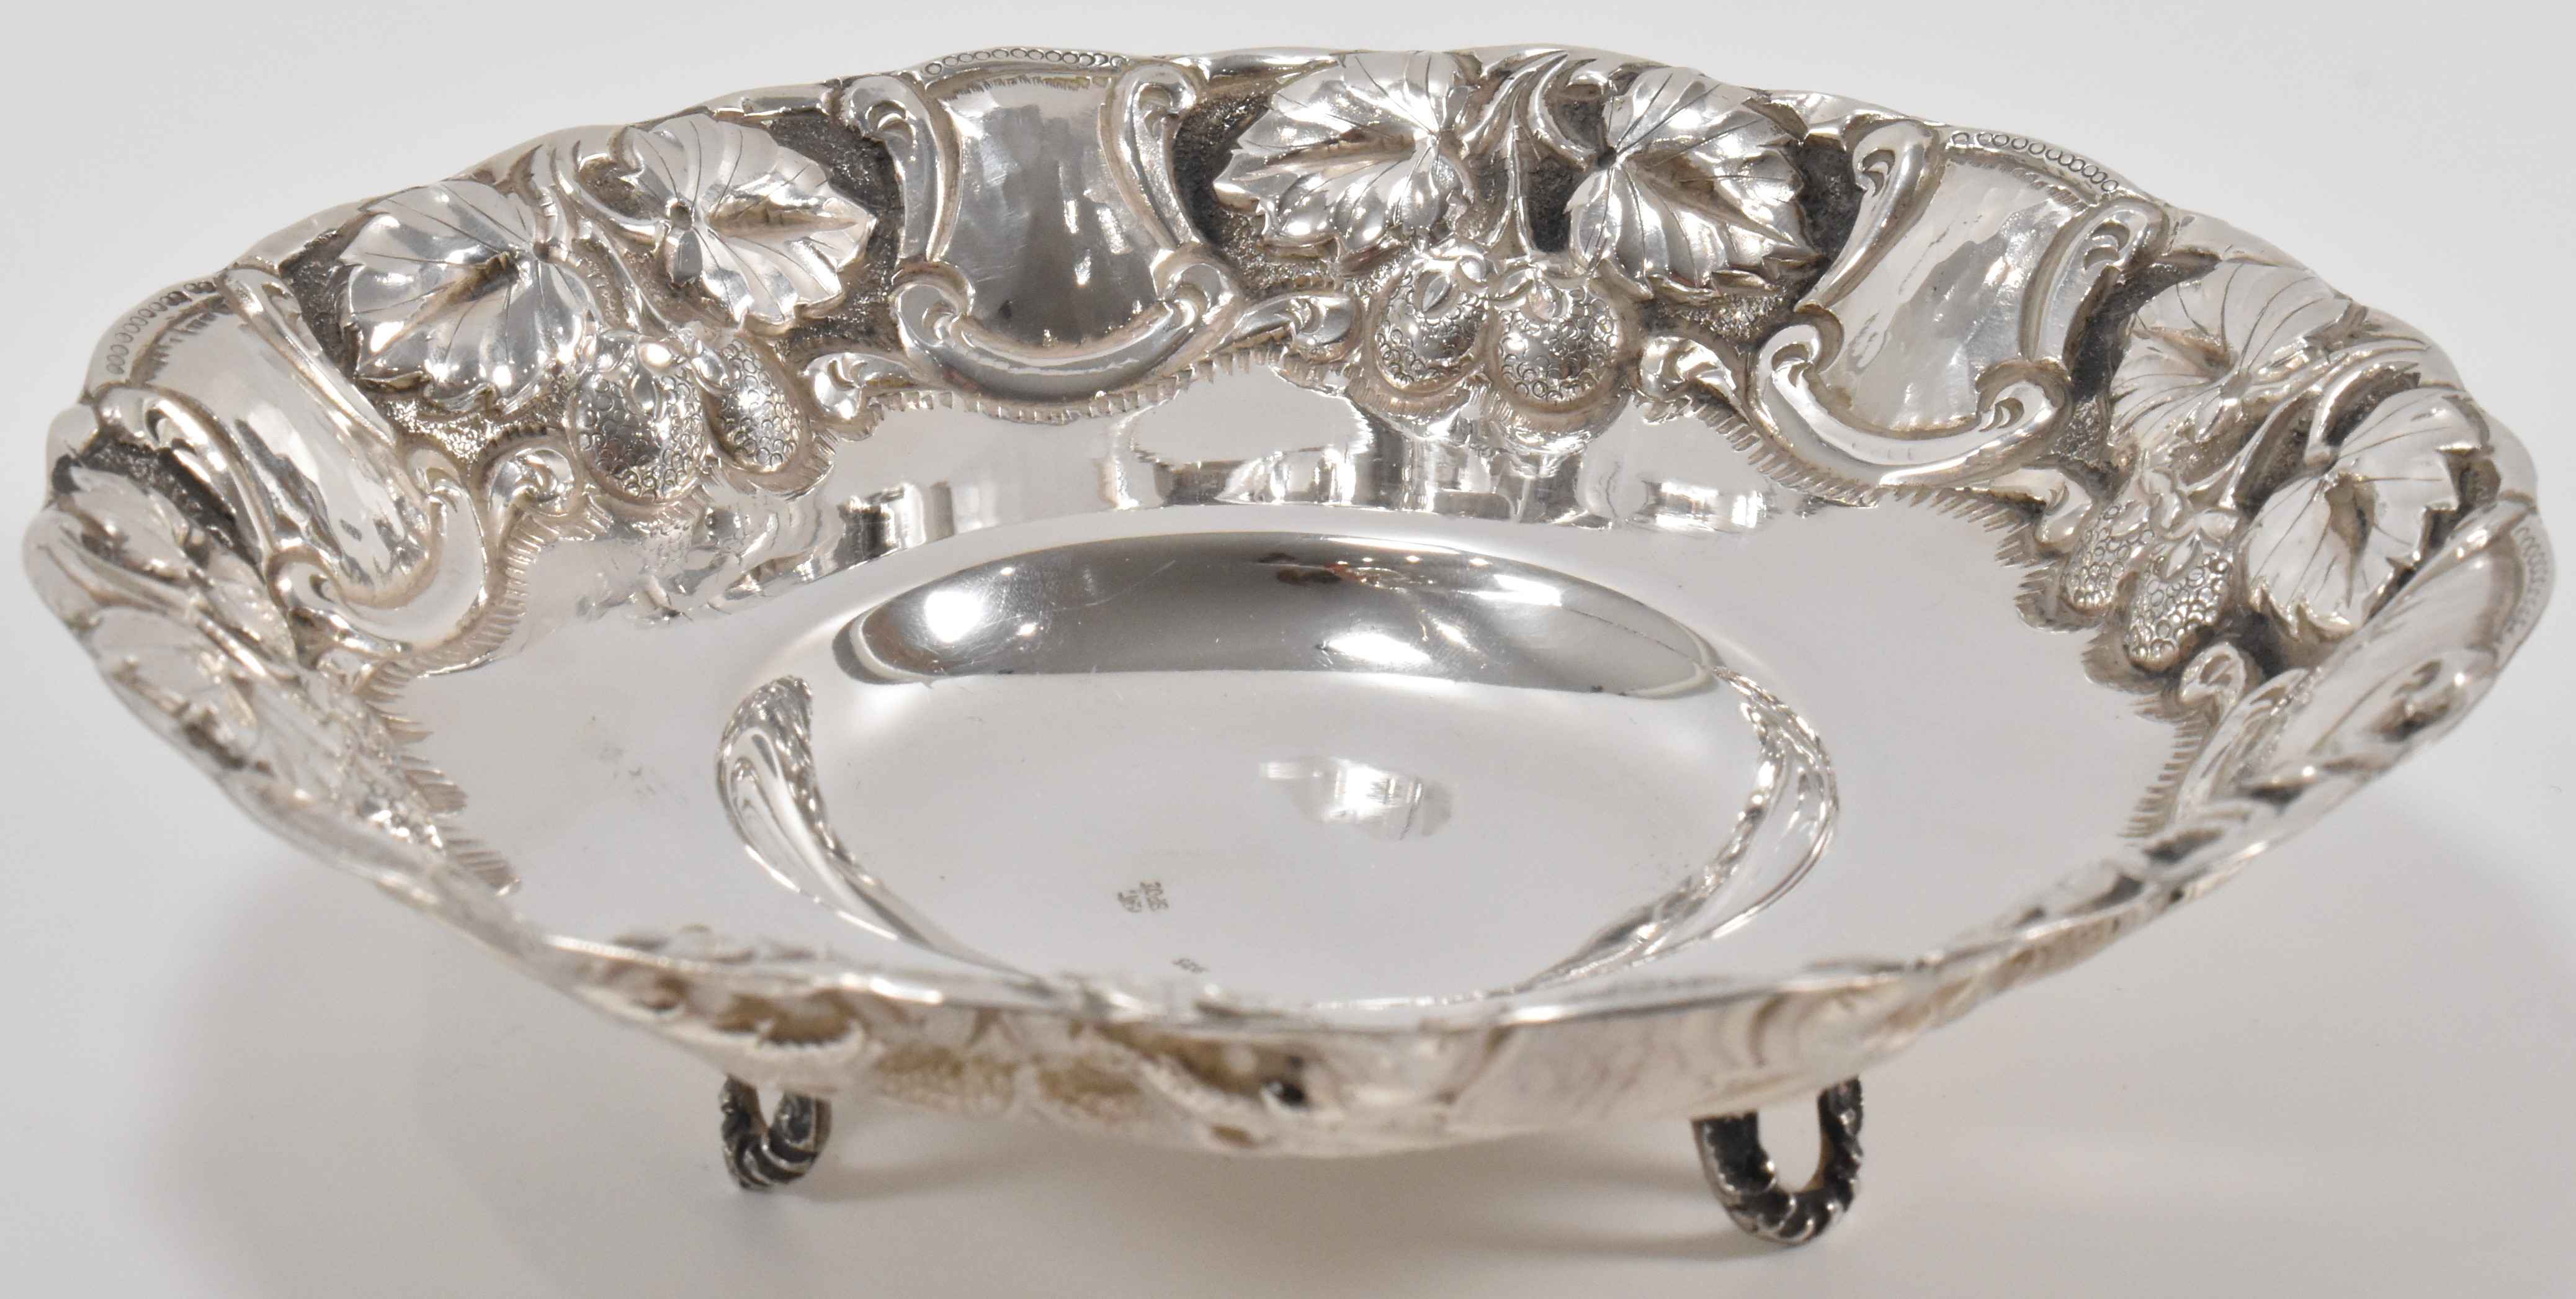 SILVER REPOUSSE STRAWBERRY DISH - Image 2 of 4